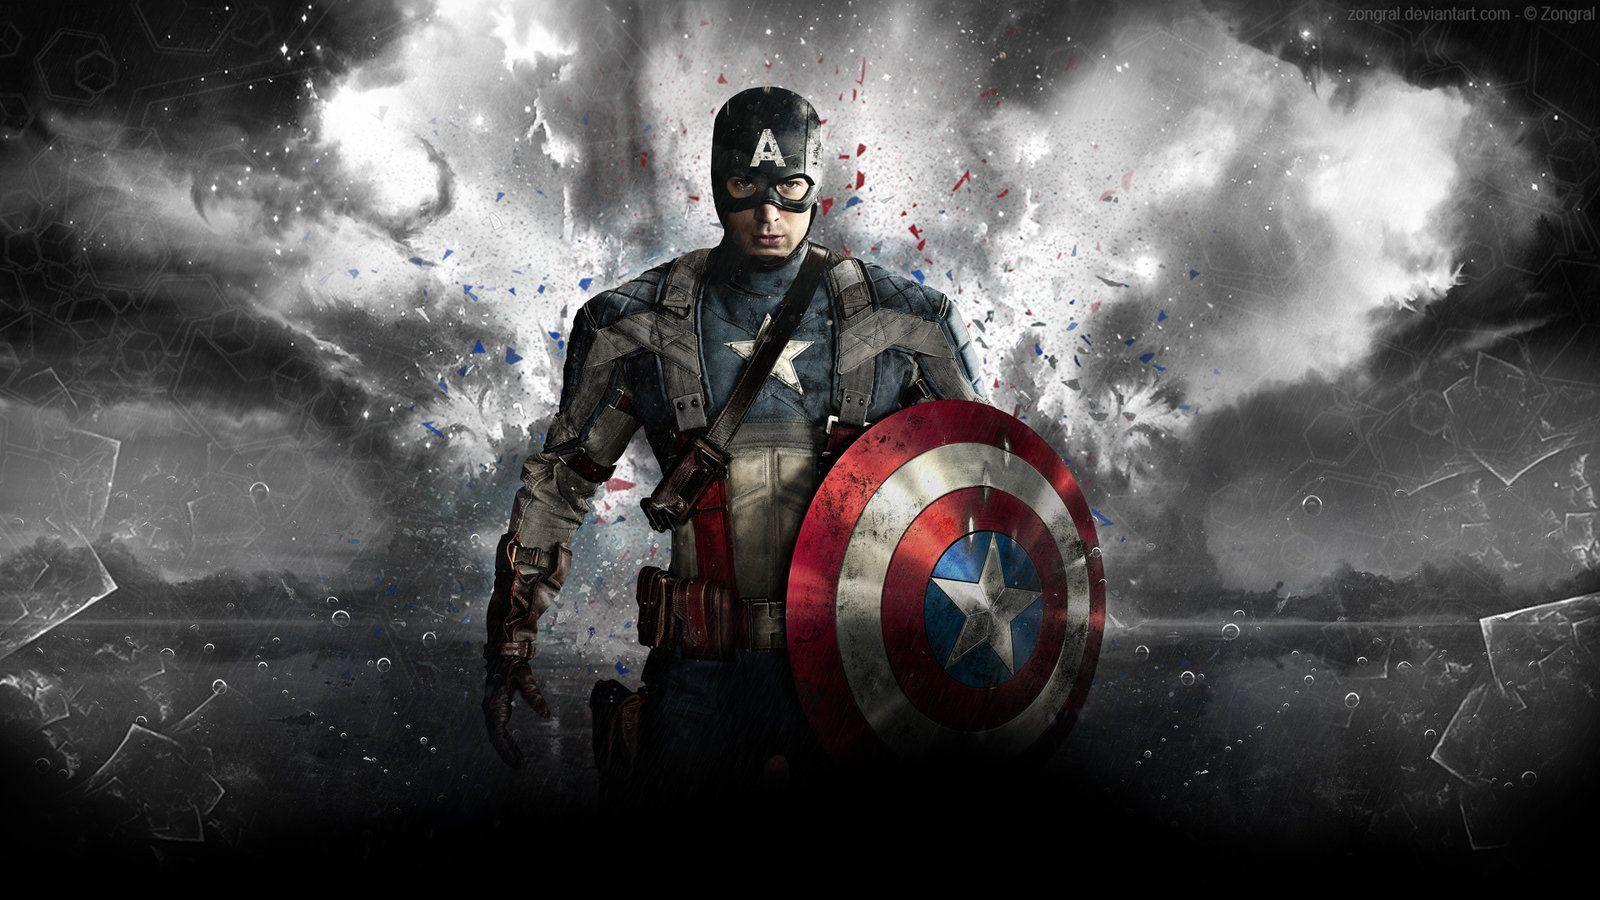 hd wallpaper for pc. Projects to try. Captain america